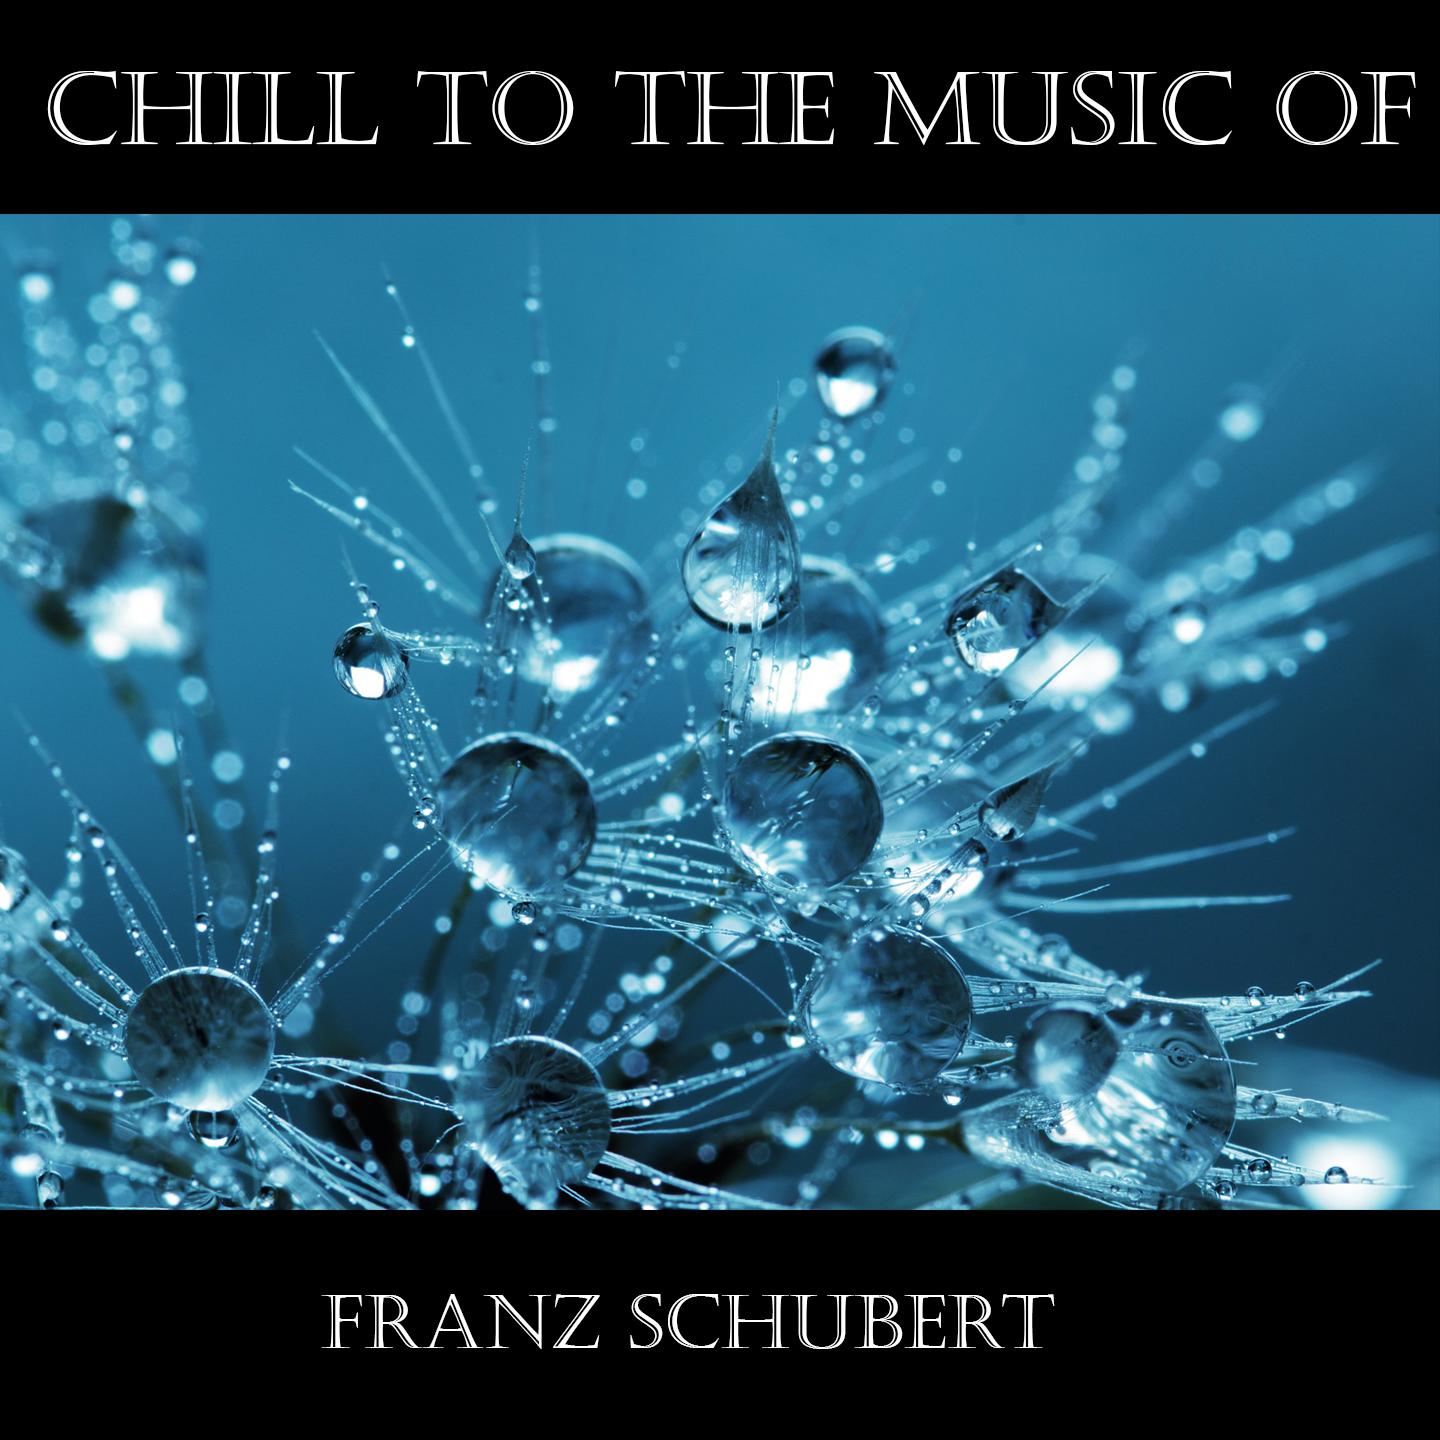 Chill To The Music Of Franz Schubert